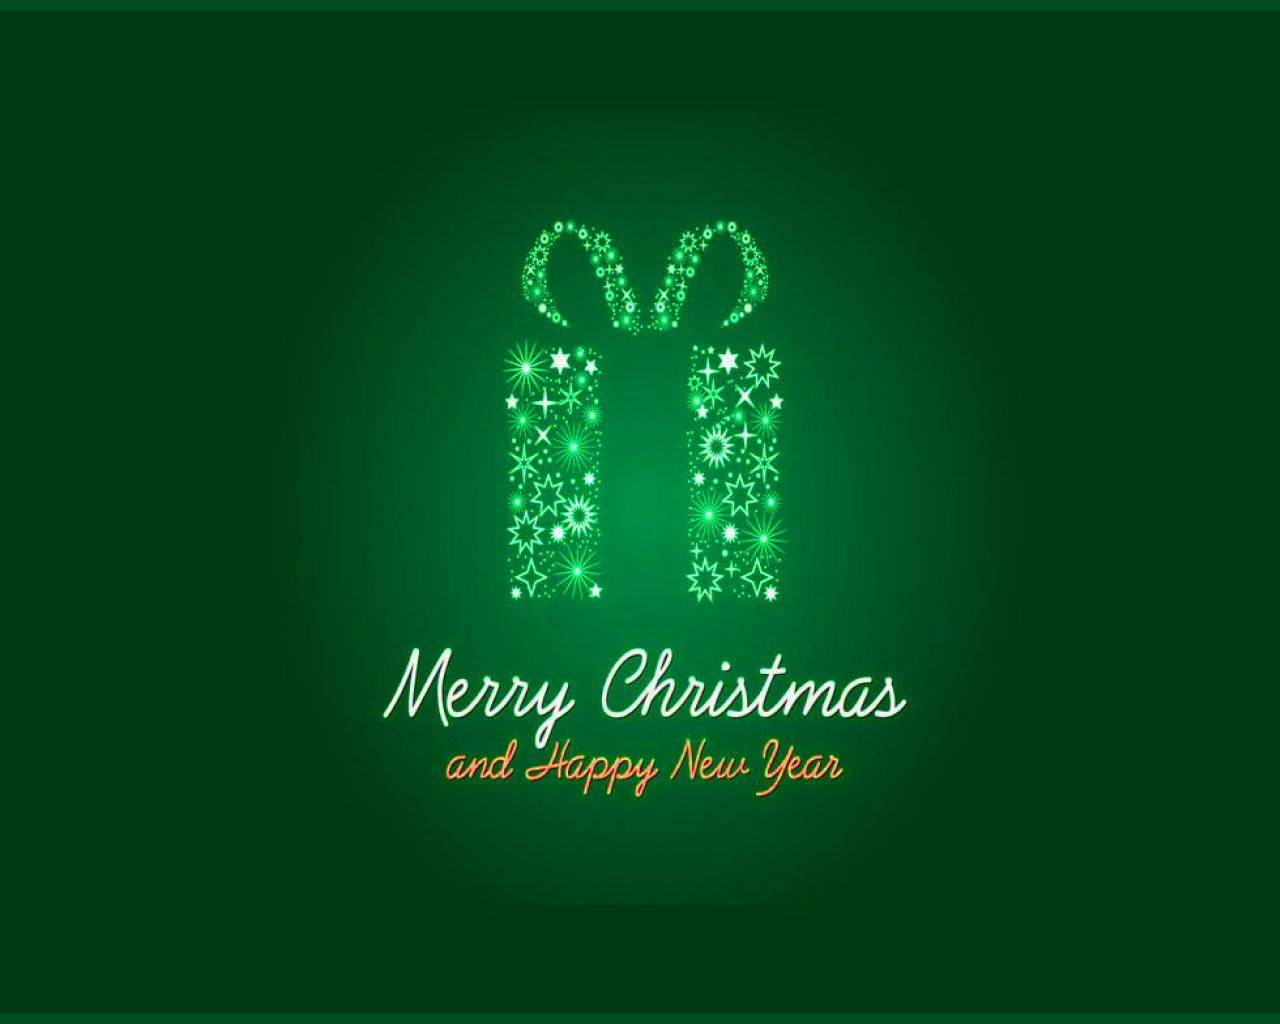 Merry Christmas And Happy New Year Wallpaper12